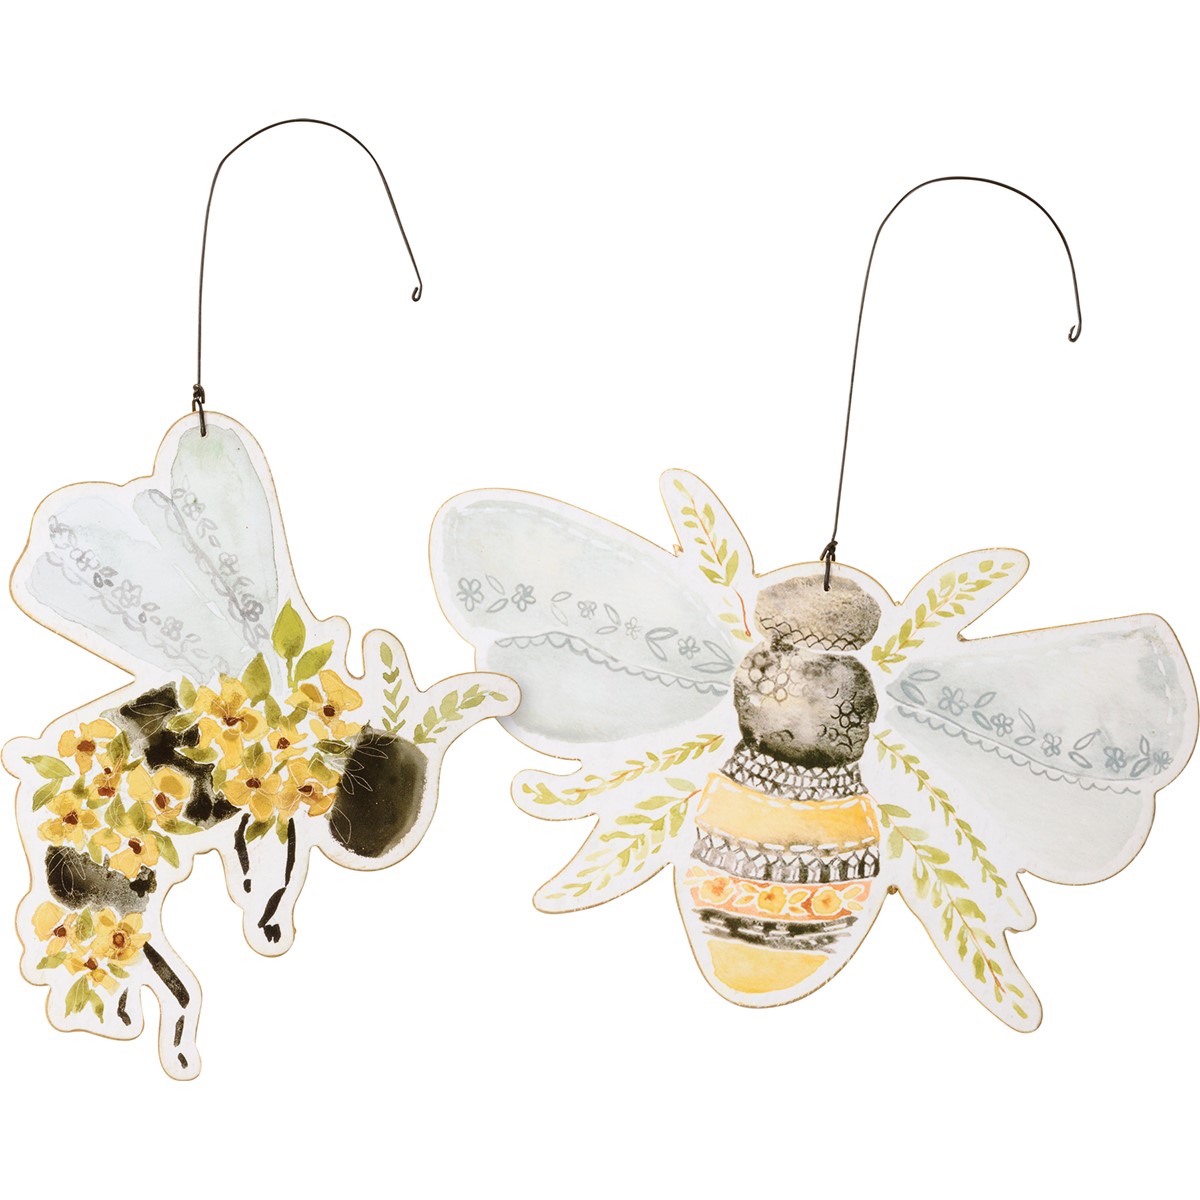 Floral Bees Ornament Set - Wood, Paper, Wire